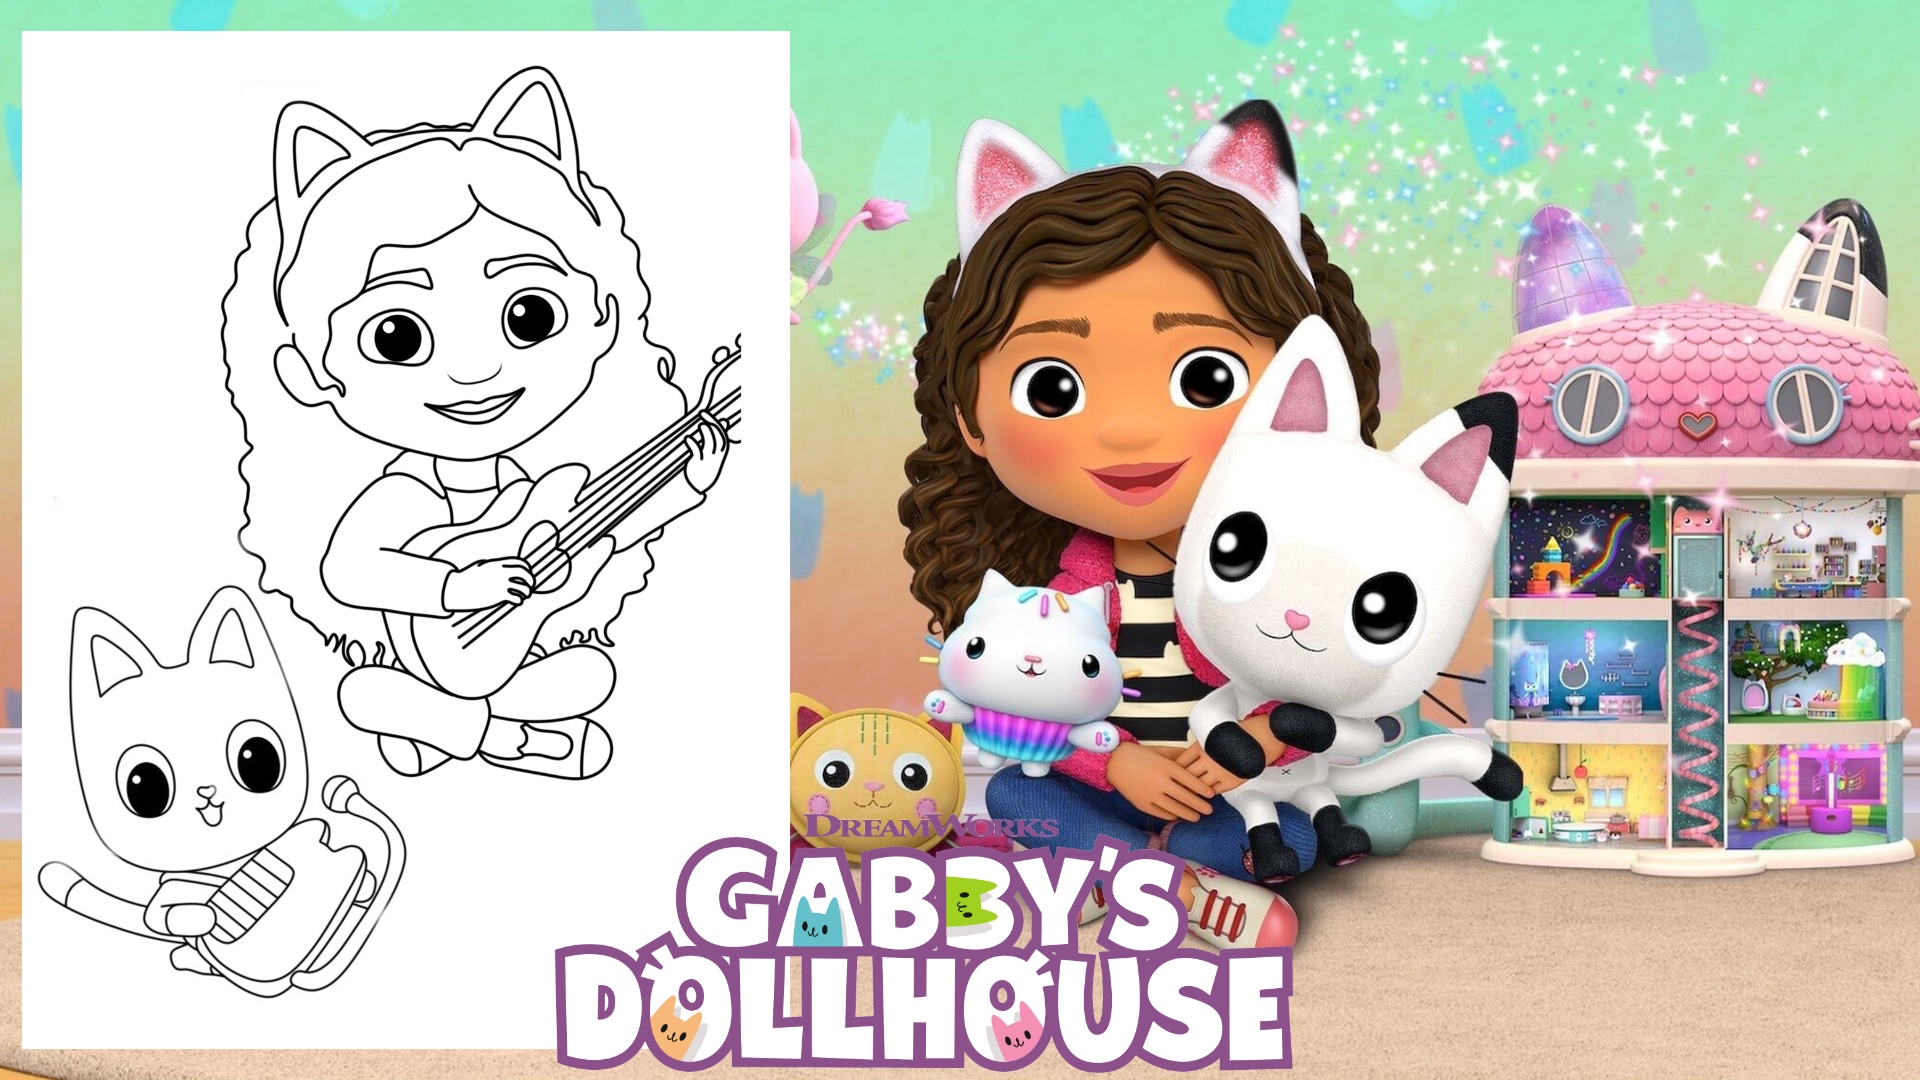 Sil on x gabbys dollhouse coloring page coloring pandy paws httpstcoenhifjfhyp via youtube gabbysdollhouse pandypaws netflix coloringpage coloring kidscoloring artforkids fun cute httpstcobmuludab x